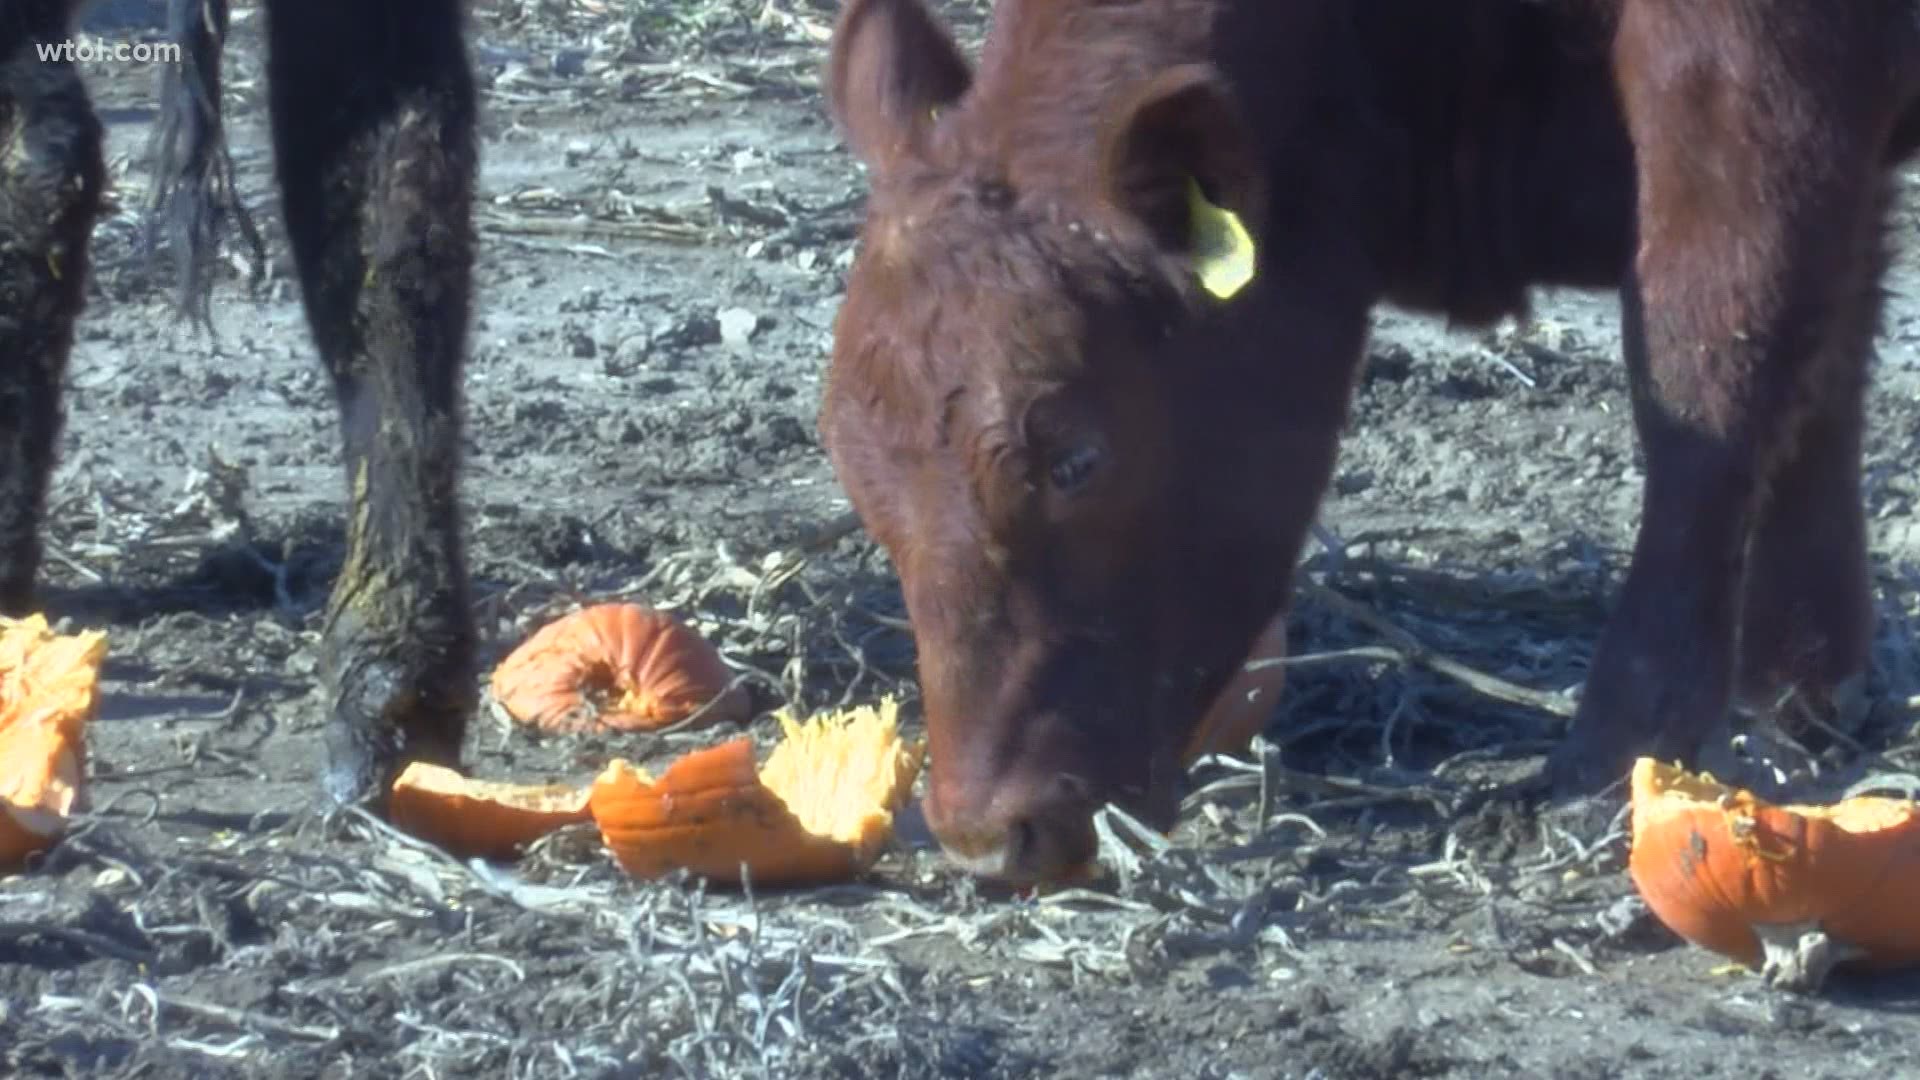 The farm has enough pumpkins left to feed the cows for about 6 weeks.